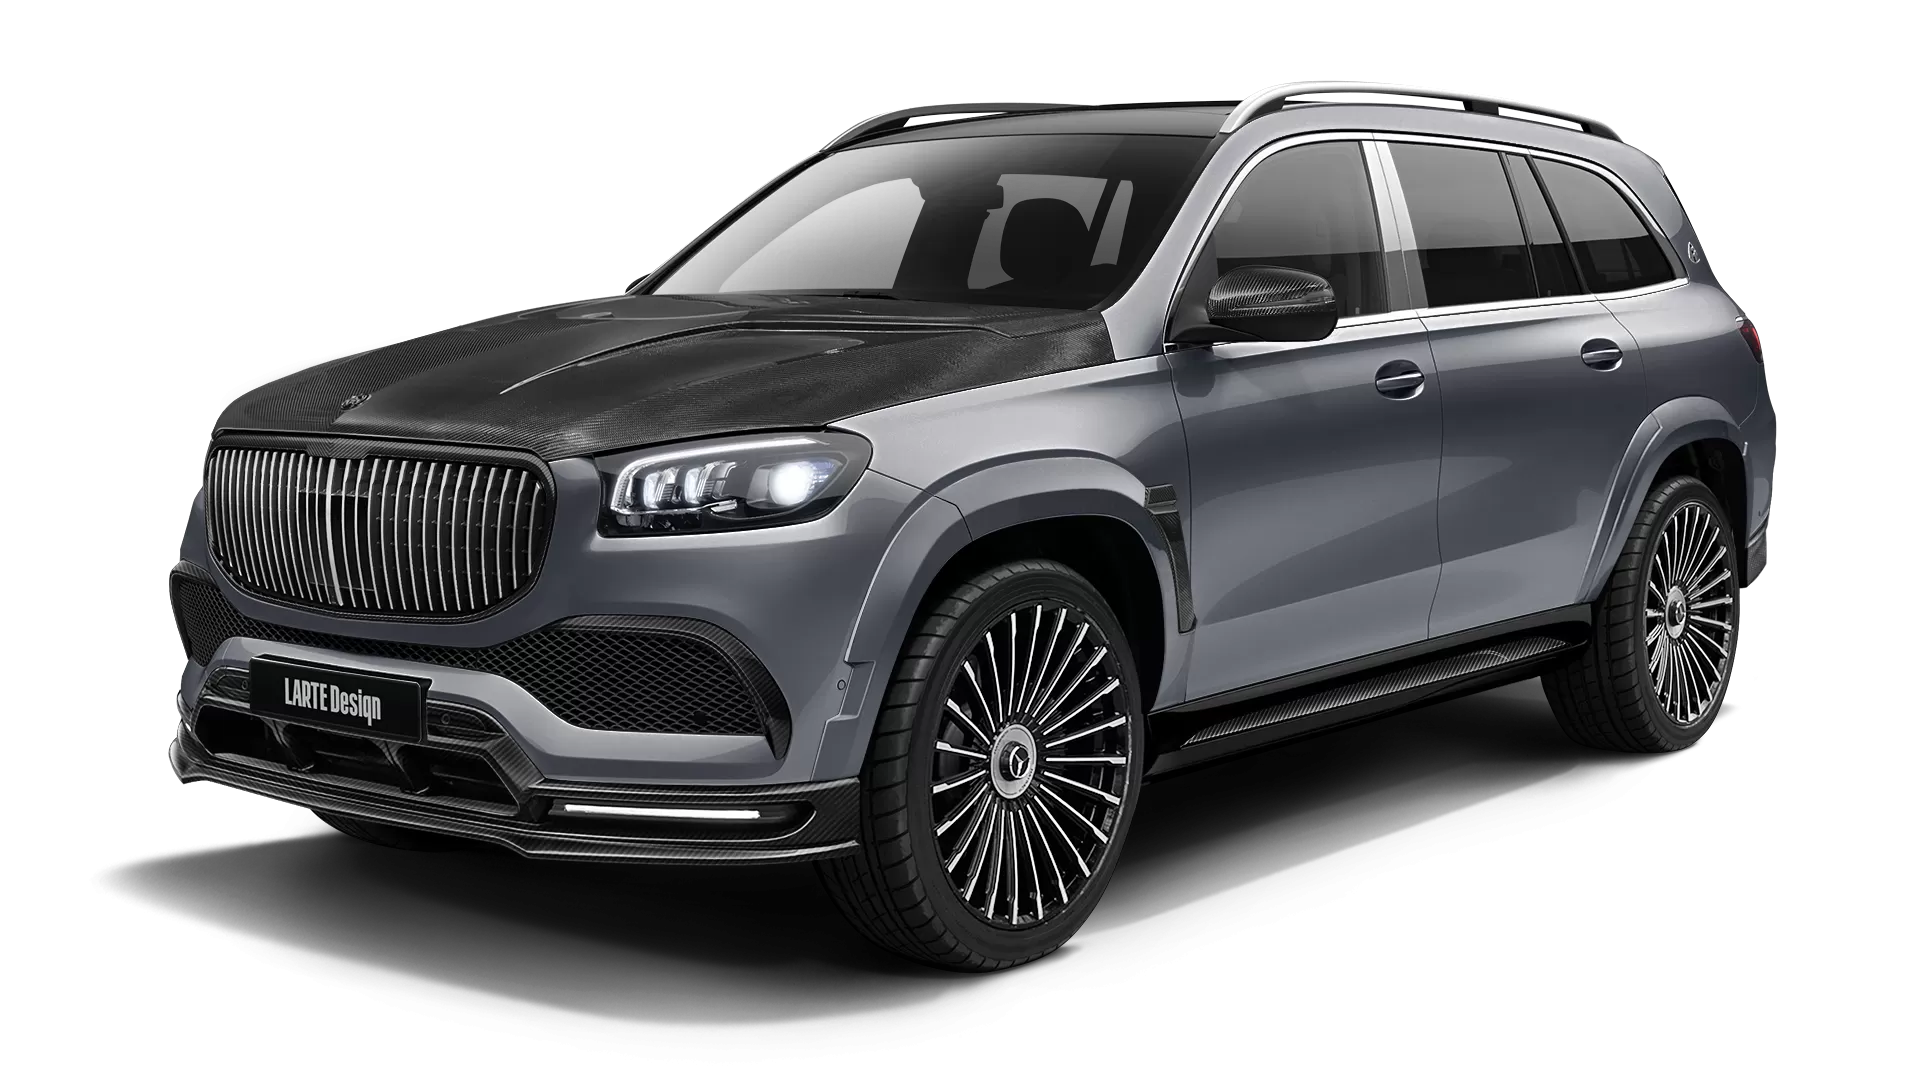 Mercedes Maybach GLS 600 with carbon body kit: front view shown in Selenite Grey